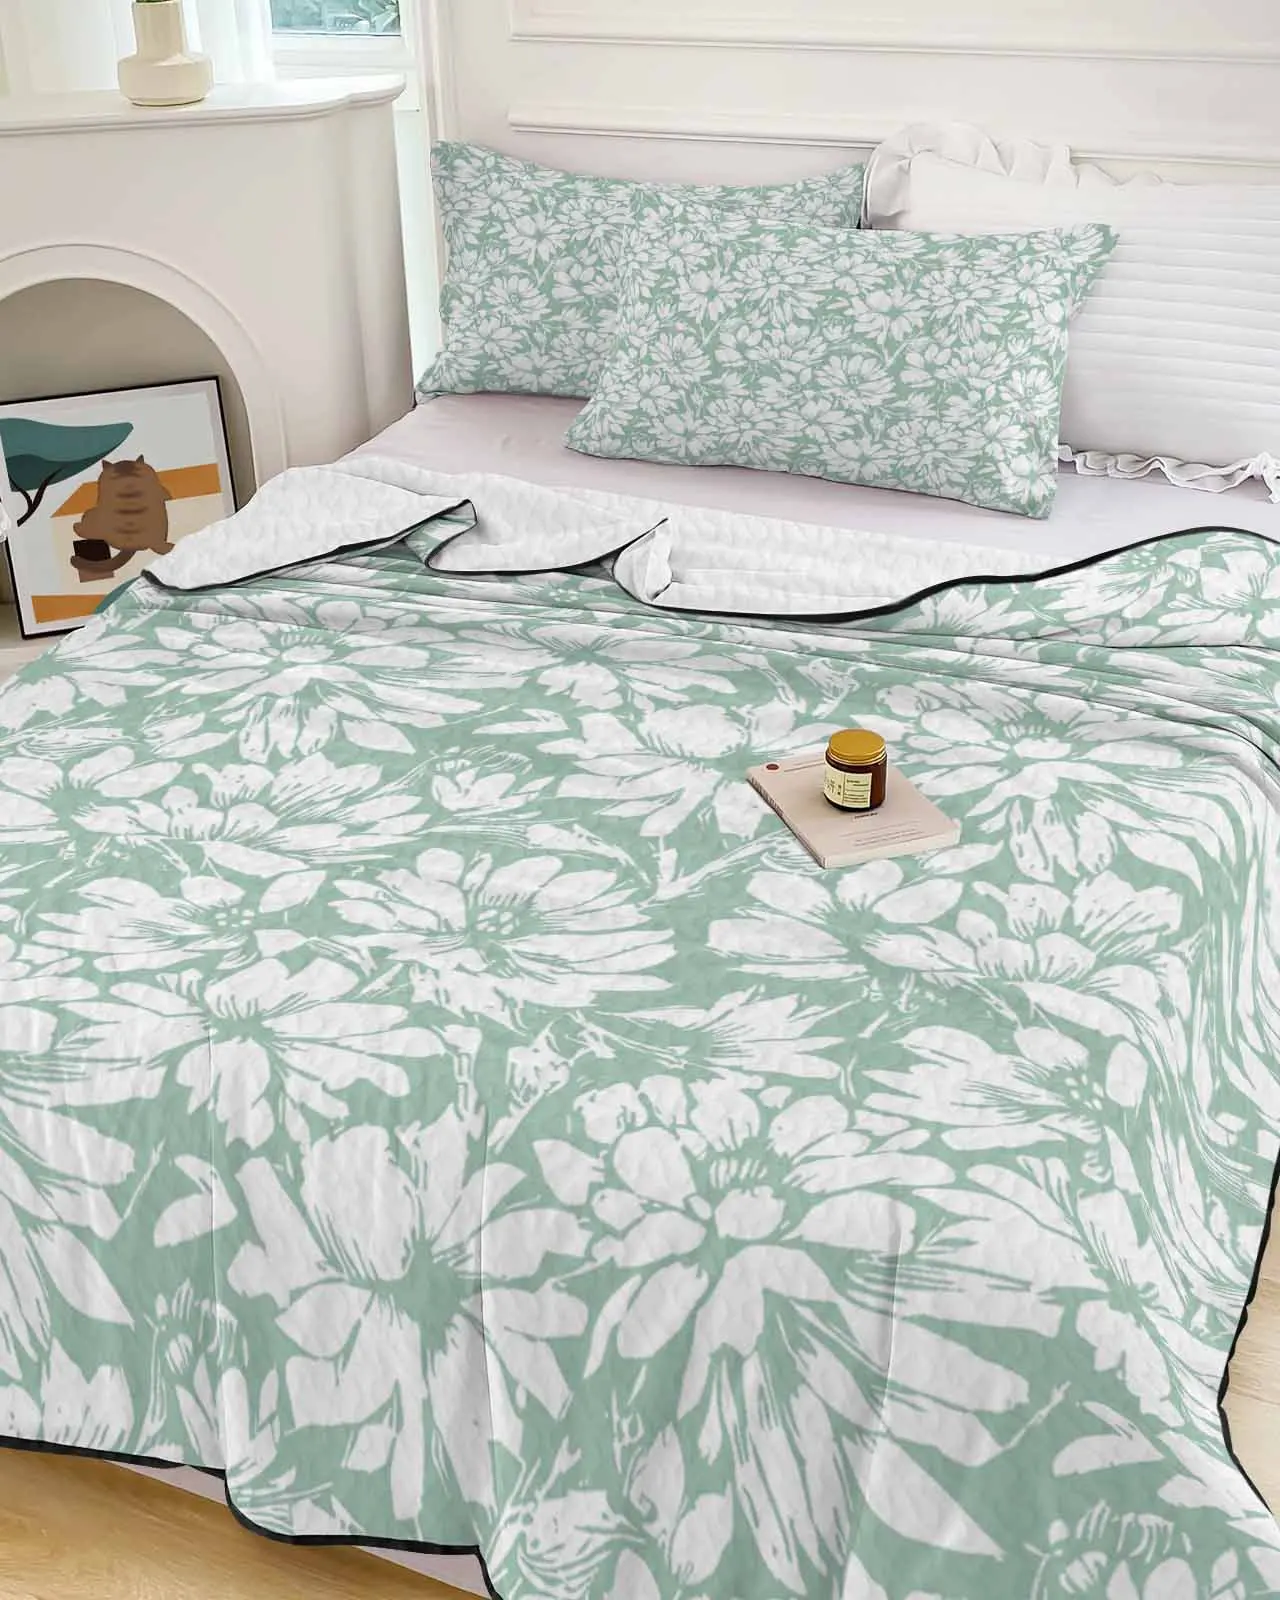 

Chrysanthemum Plants Spring Flower Cooling Blankets Air Condition Comforter Lightweight Summer Quilt for Bed Soft Thin Quilt